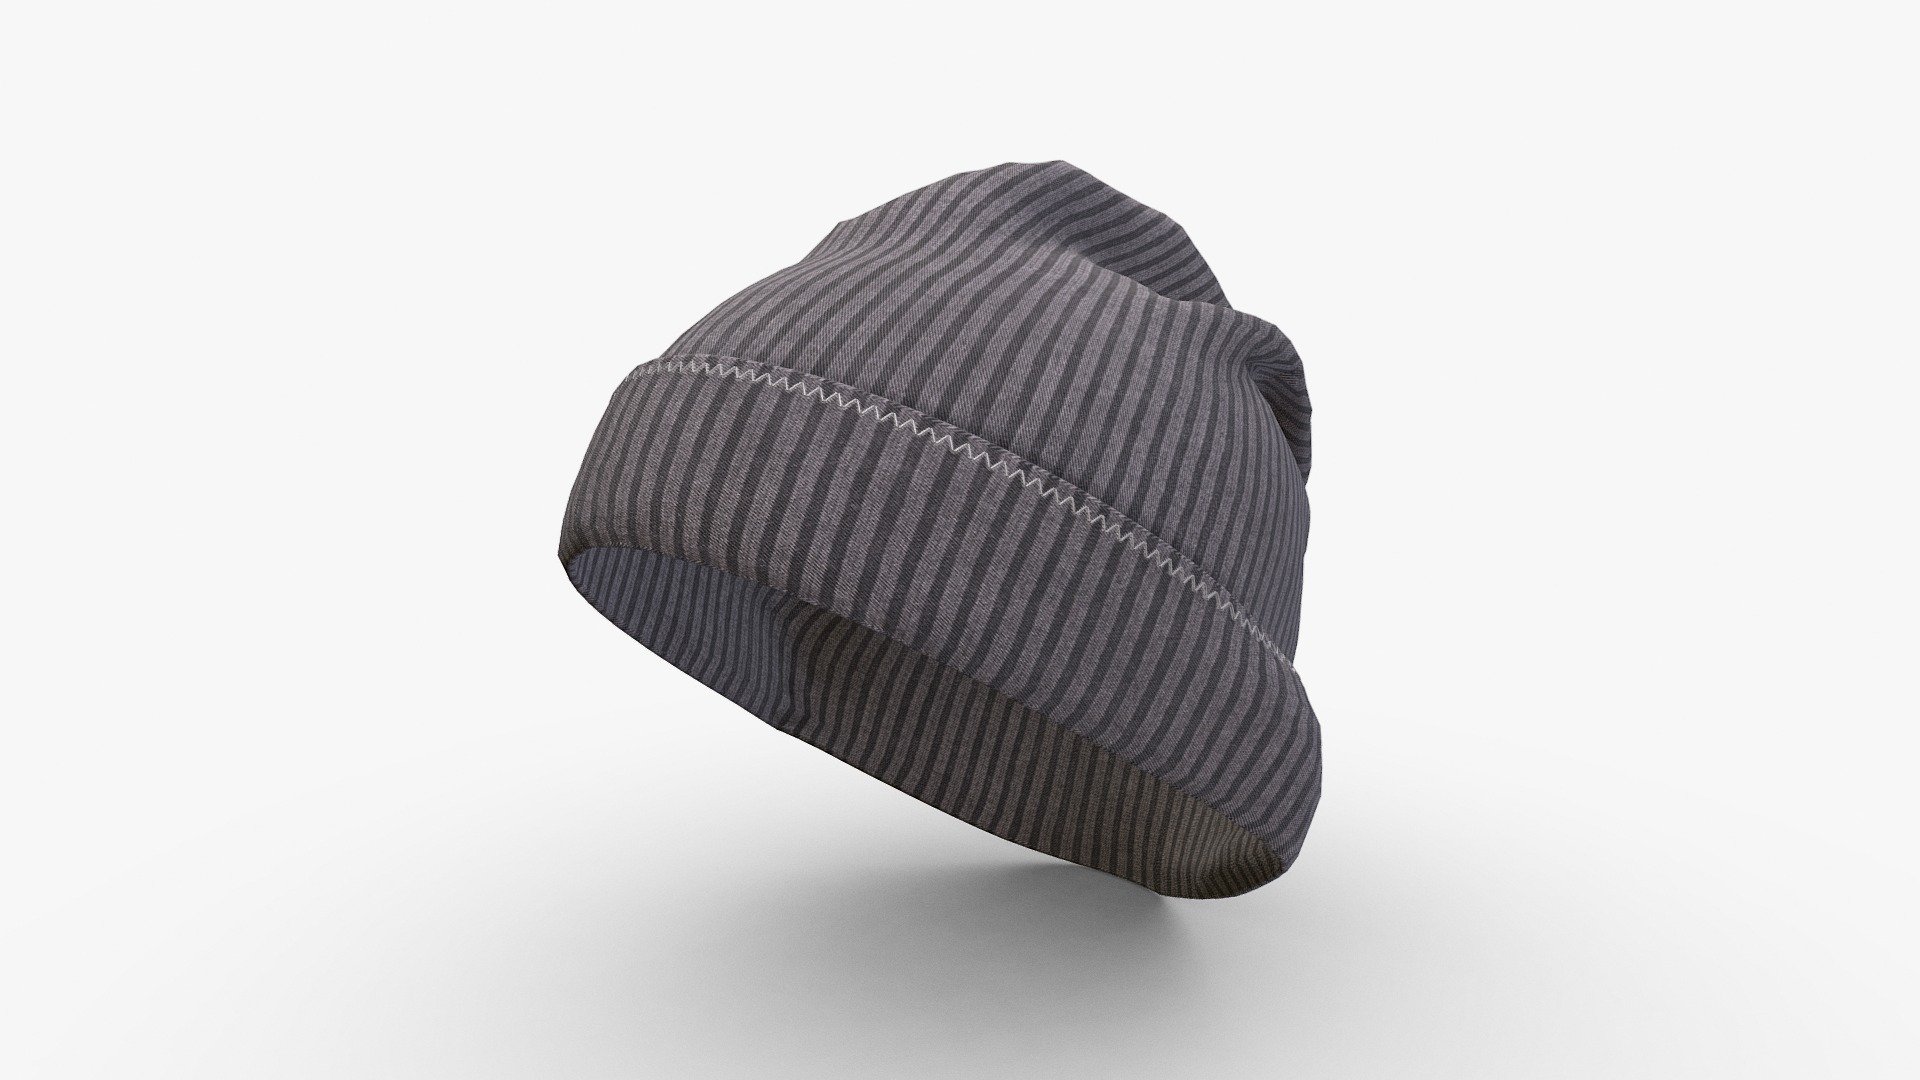 Standard Beanie

Softwares: Marvelous designer, Blender &amp; substance 3d painter.

This model is high poly, Ready to be baked to your low poly. This model has one material. The textures are 4096x4096. This model is highly detailed. The marvelous designer file is included, The blender native file is included. Other formats obj, fbx and dae. The model is centered 0x0x0. The textures format is .png. The model has updated uvs. The model consist of 5 texture maps. Base color, roughness, metallic, normal, height! 

Please leave a like and subscribe for more models coming soon! - Standard Beanie Update - Buy Royalty Free 3D model by Pieter Ferreira (@Badboy17Aiden) 3d model